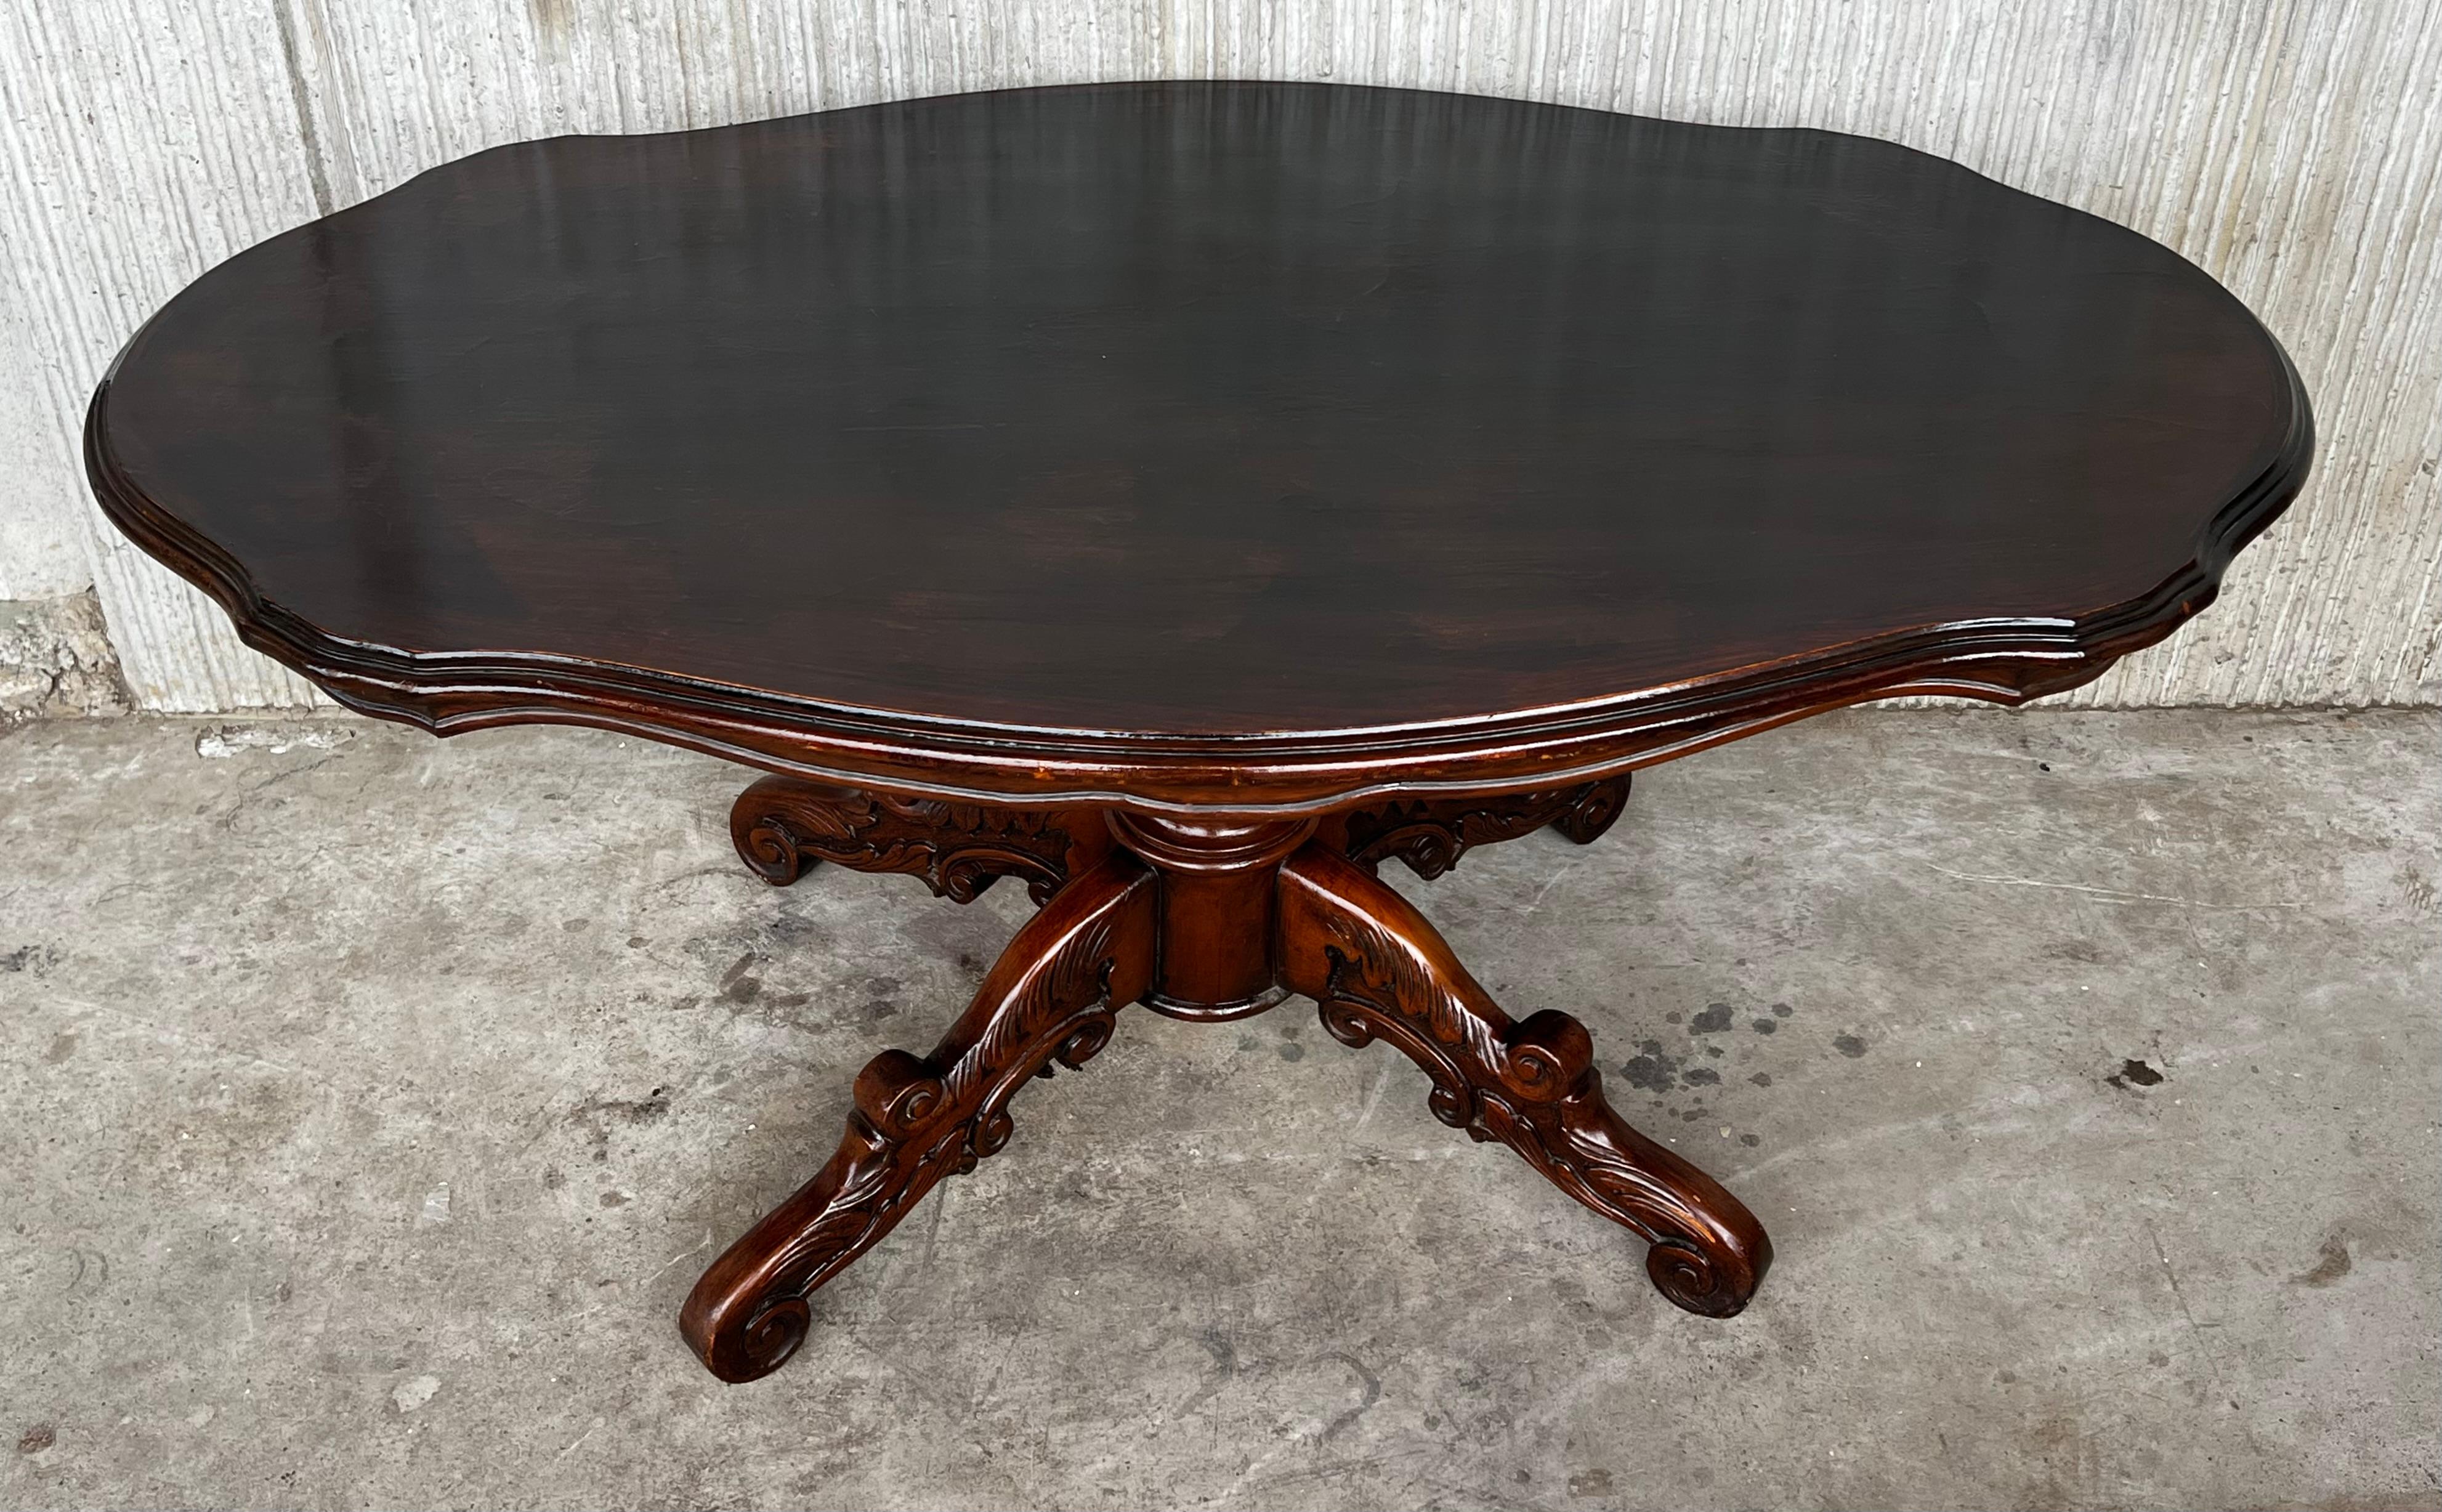 20th century Spanish Mariano Garcia carved pedestal coffee table.